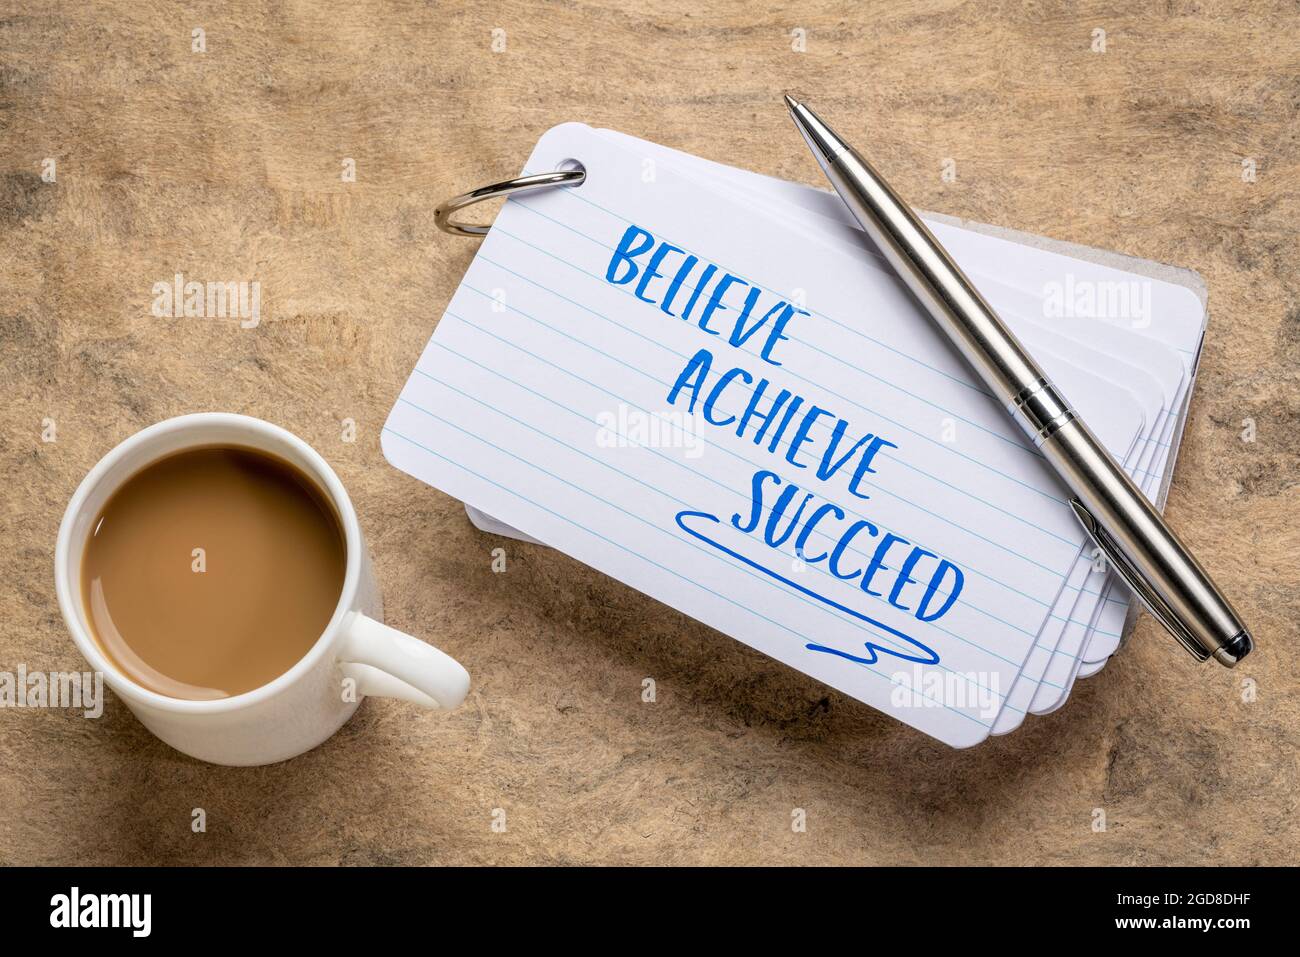 believe, achieve, succeed motivational words - handwriting on a stuck of index card with a cup of coffee, business, goal setting and personal developm Stock Photo